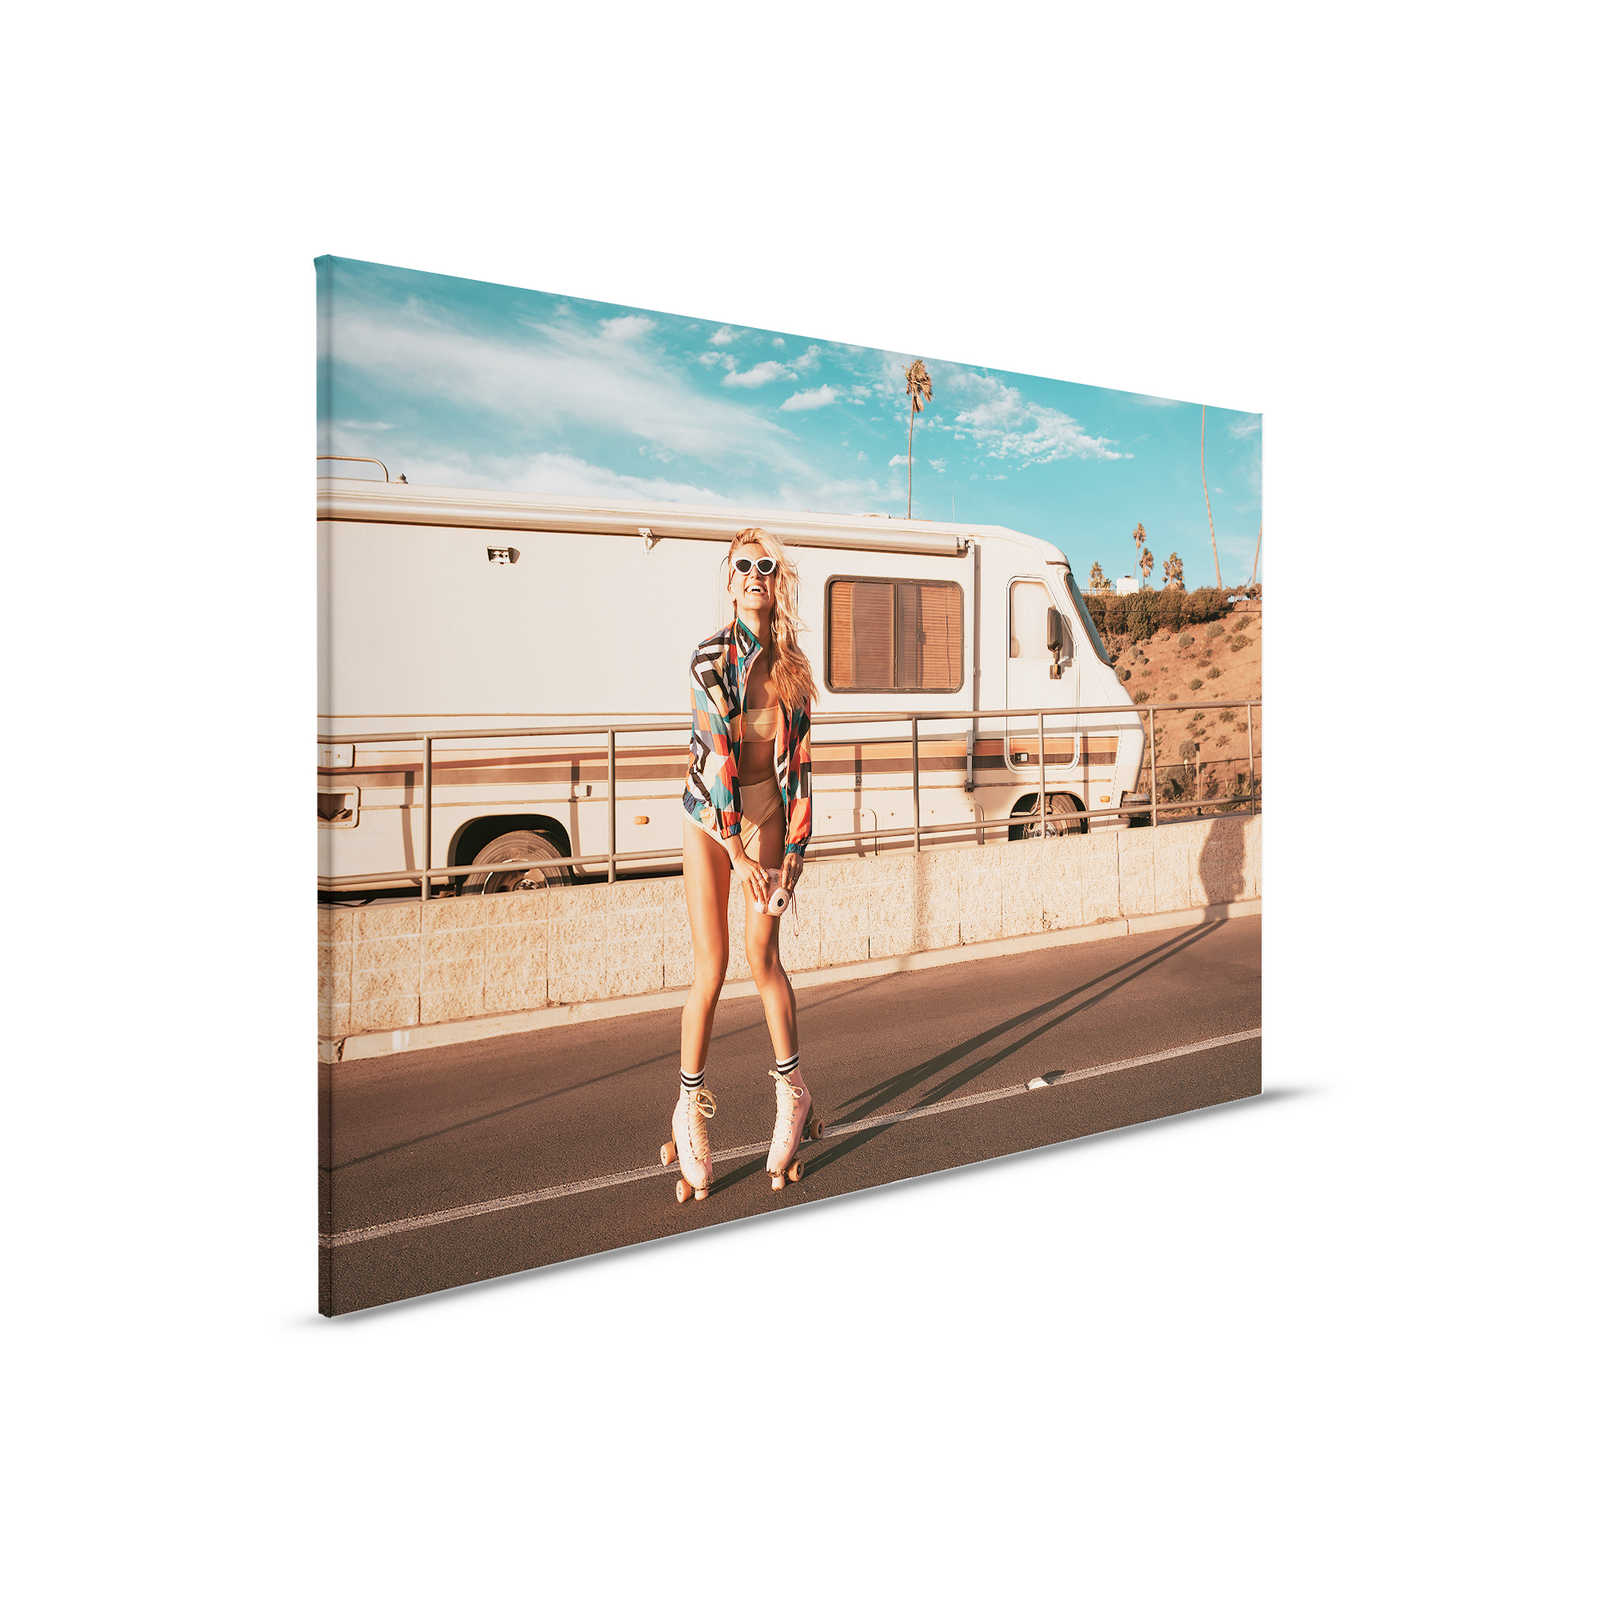         Canvas painting with Skater Girl and Camper in Summer Vibe - 0.90 m x 0.60 m
    